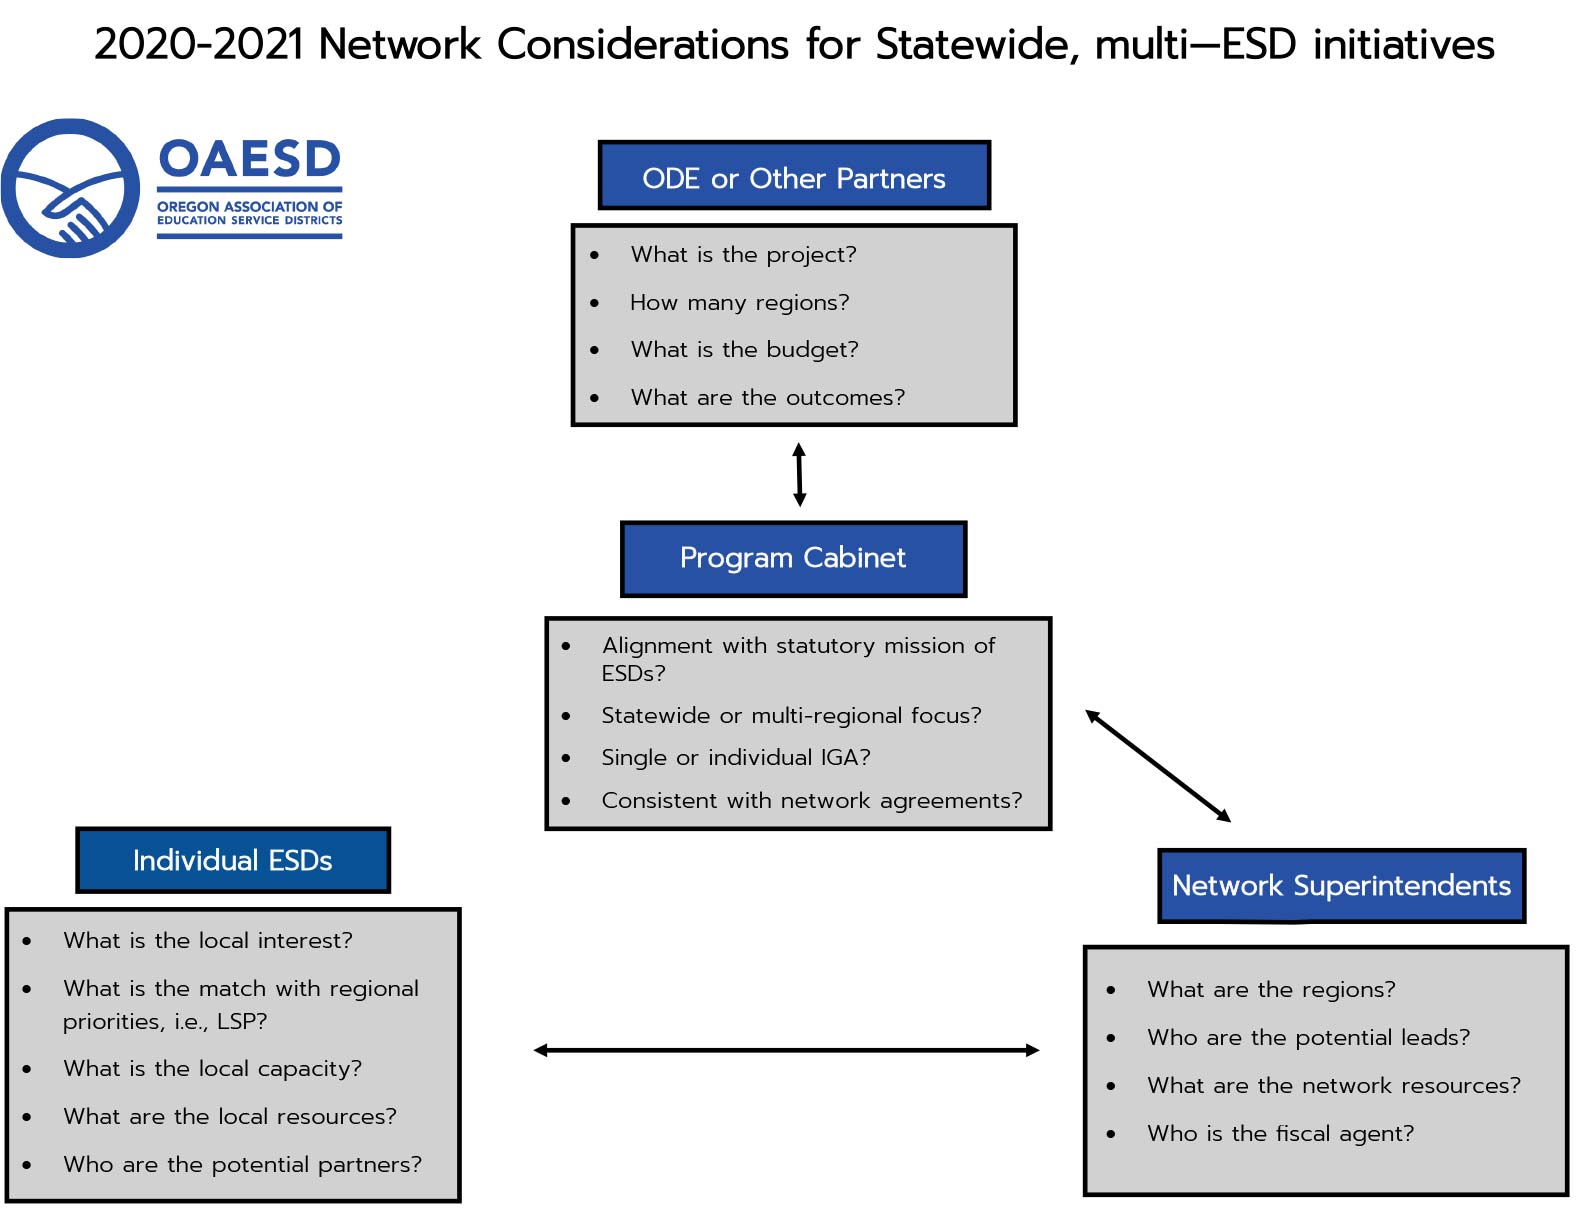 2020-2021 Network Considerations for Statewide, multi-ESD initiatives